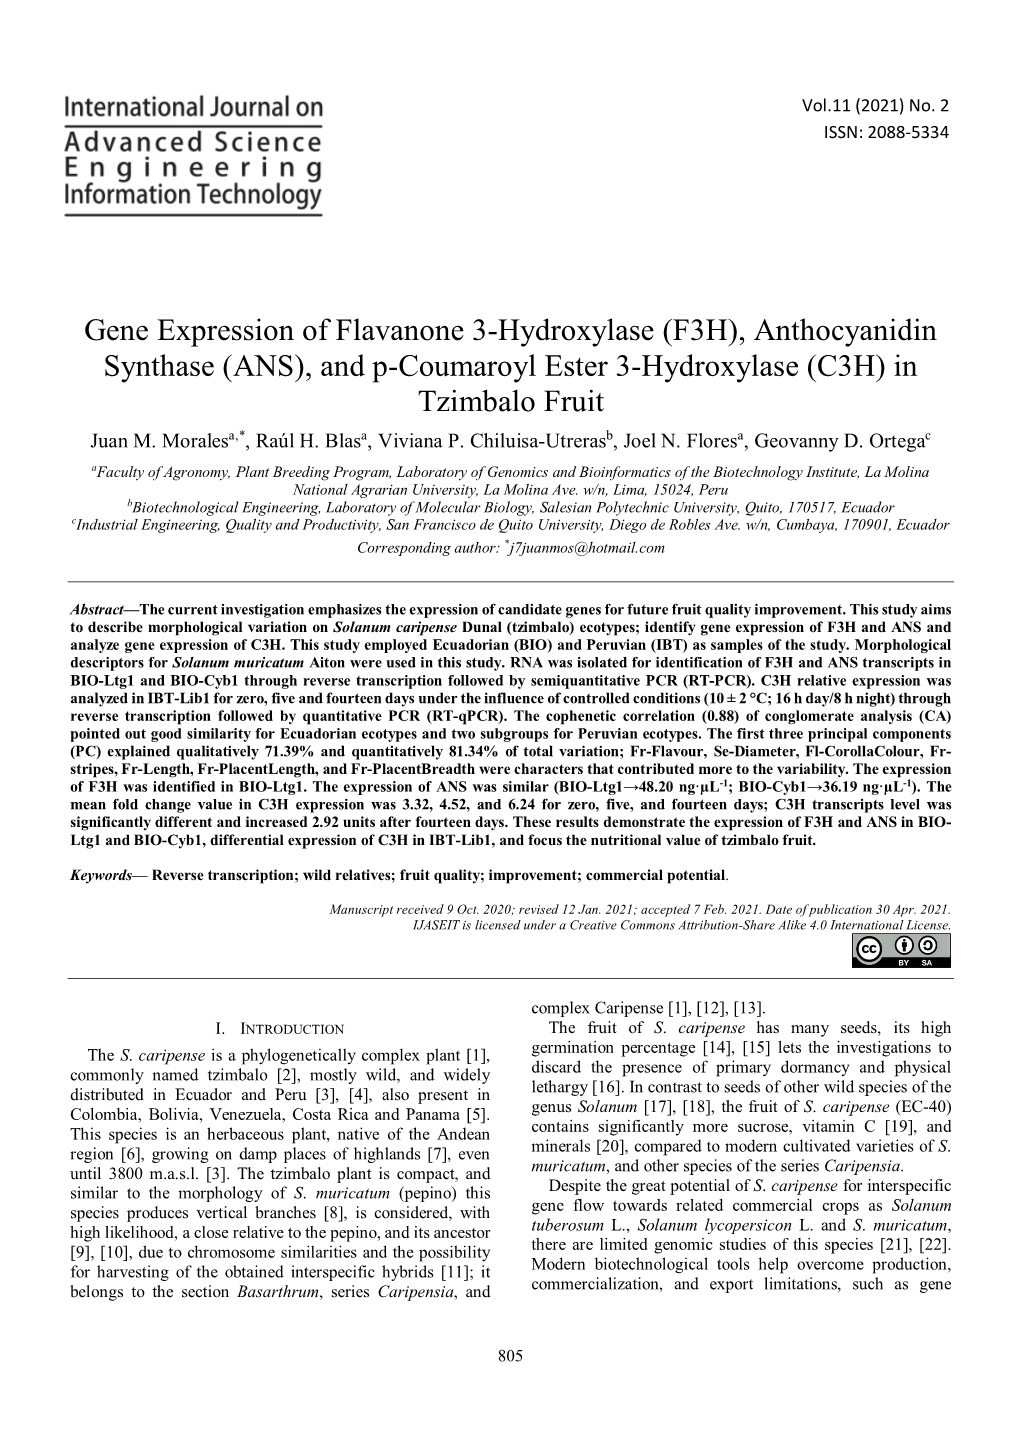 Gene Expression of Flavanone 3-Hydroxylase (F3H), Anthocyanidin Synthase (ANS), and P-Coumaroyl Ester 3-Hydroxylase (C3H) in Tzimbalo Fruit Juan M